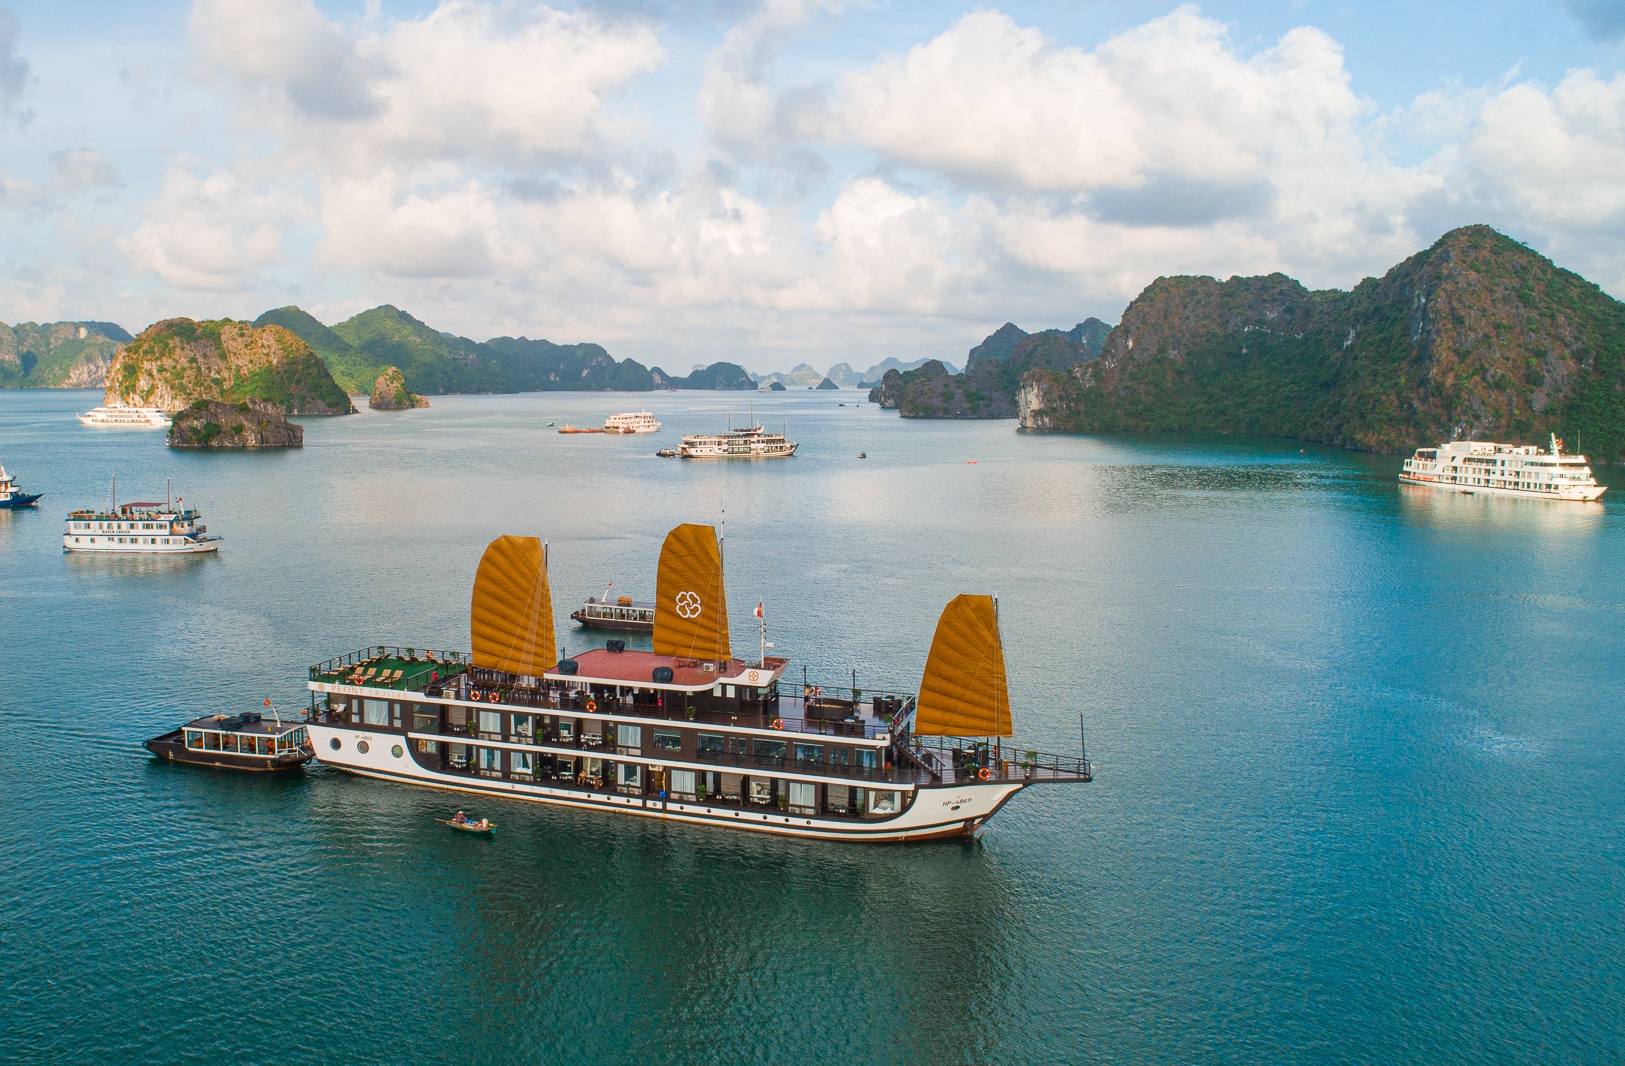 Best to do Halong Bay cruise during Spring in Northern Vietnam